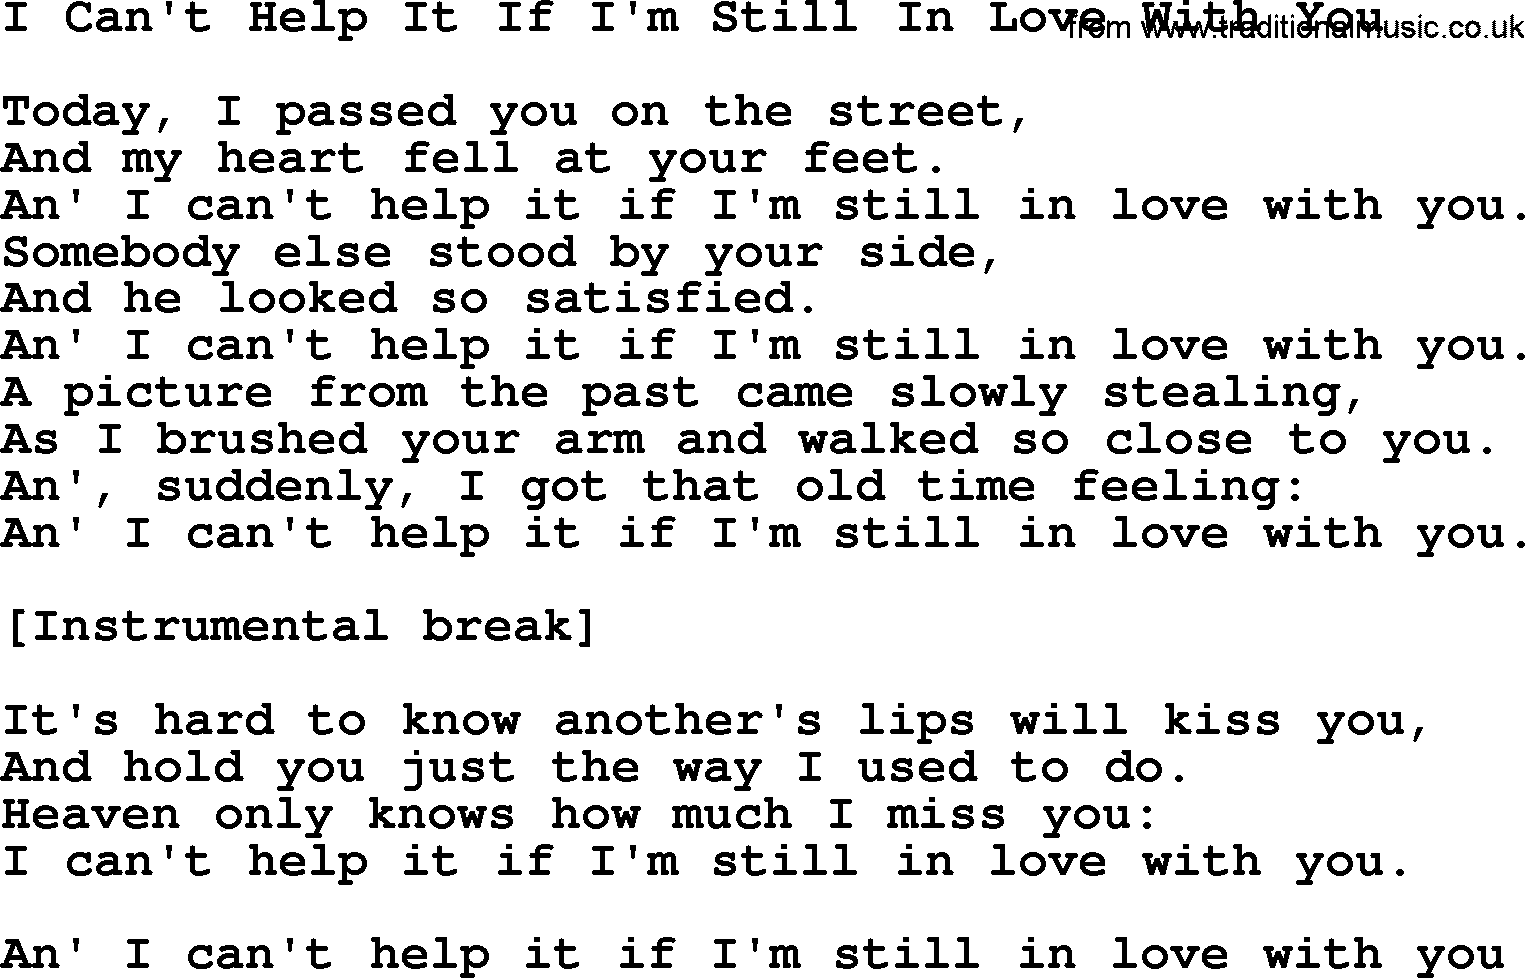 Willie Nelson song: I Can't Help It If I'm Still In Love With You lyrics